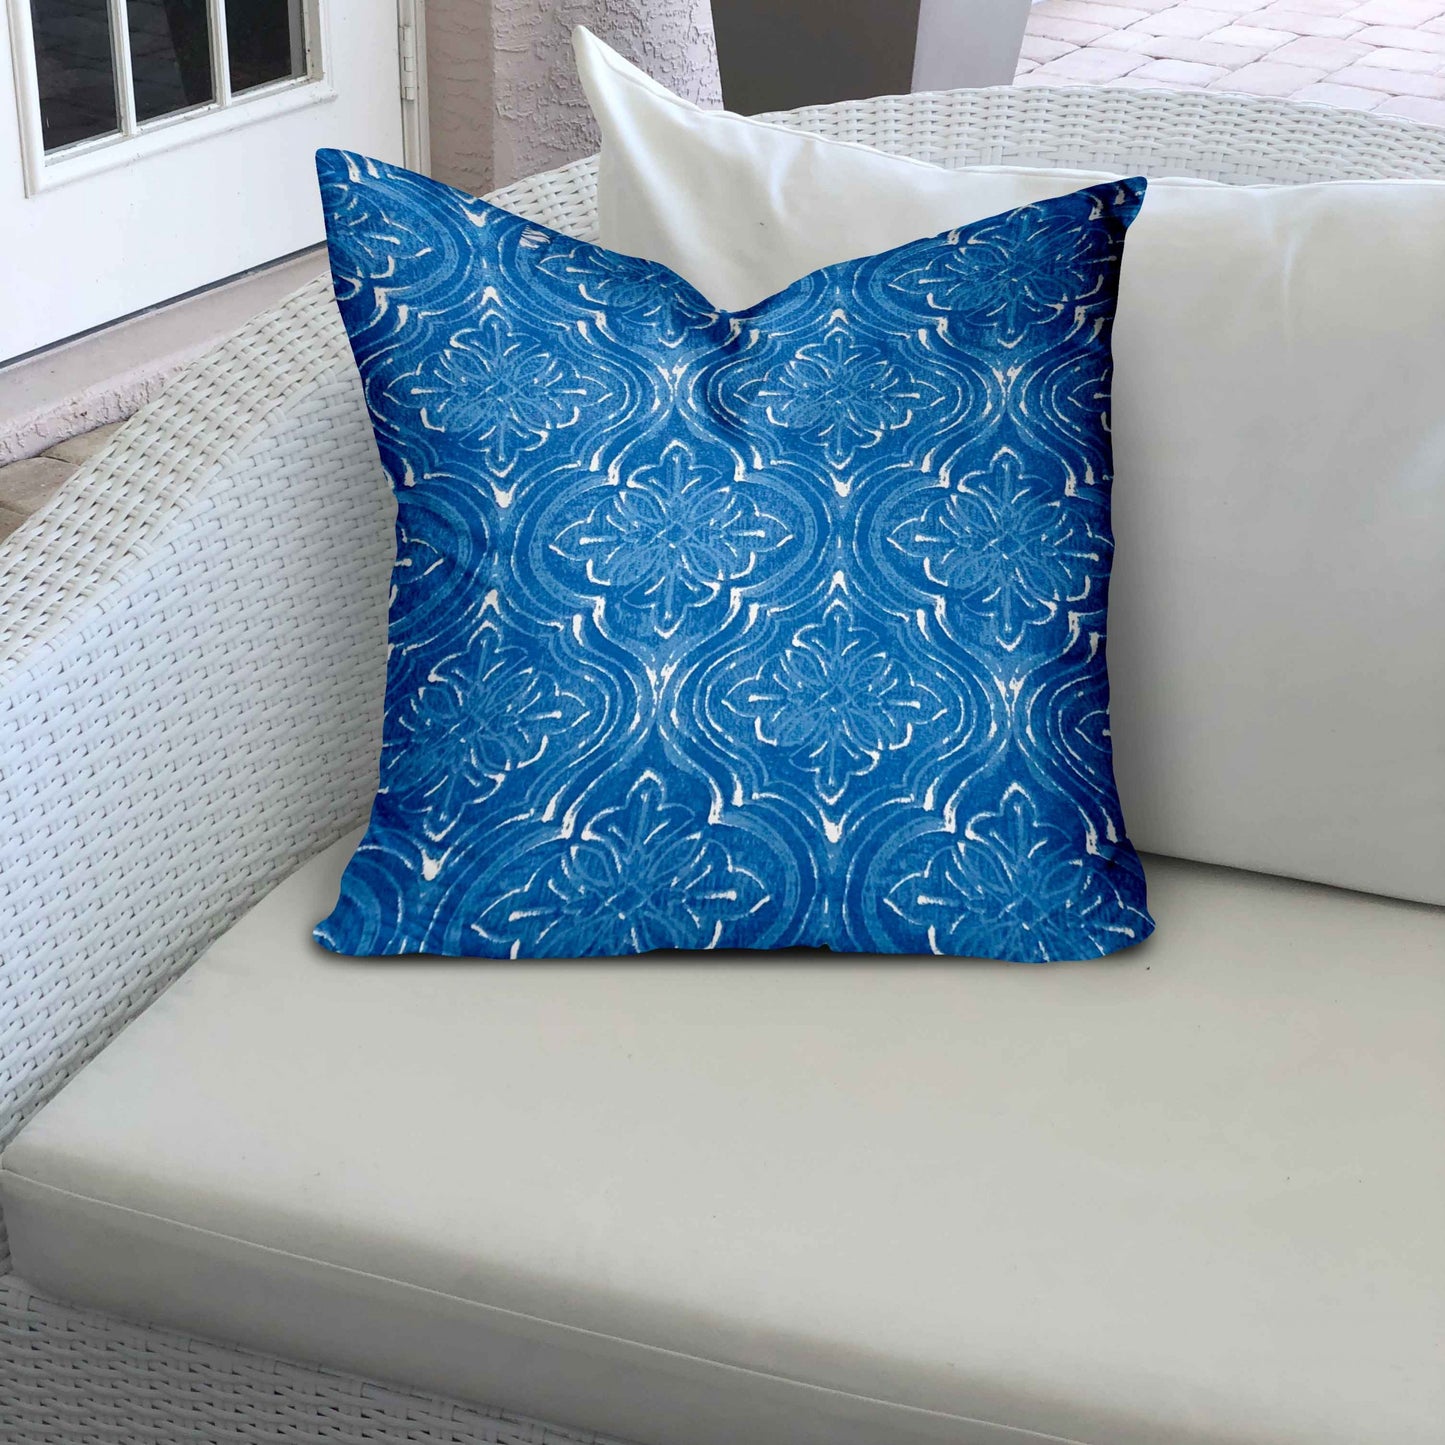 18" X 18" Blue And White Enveloped Ikat Throw Indoor Outdoor Pillow